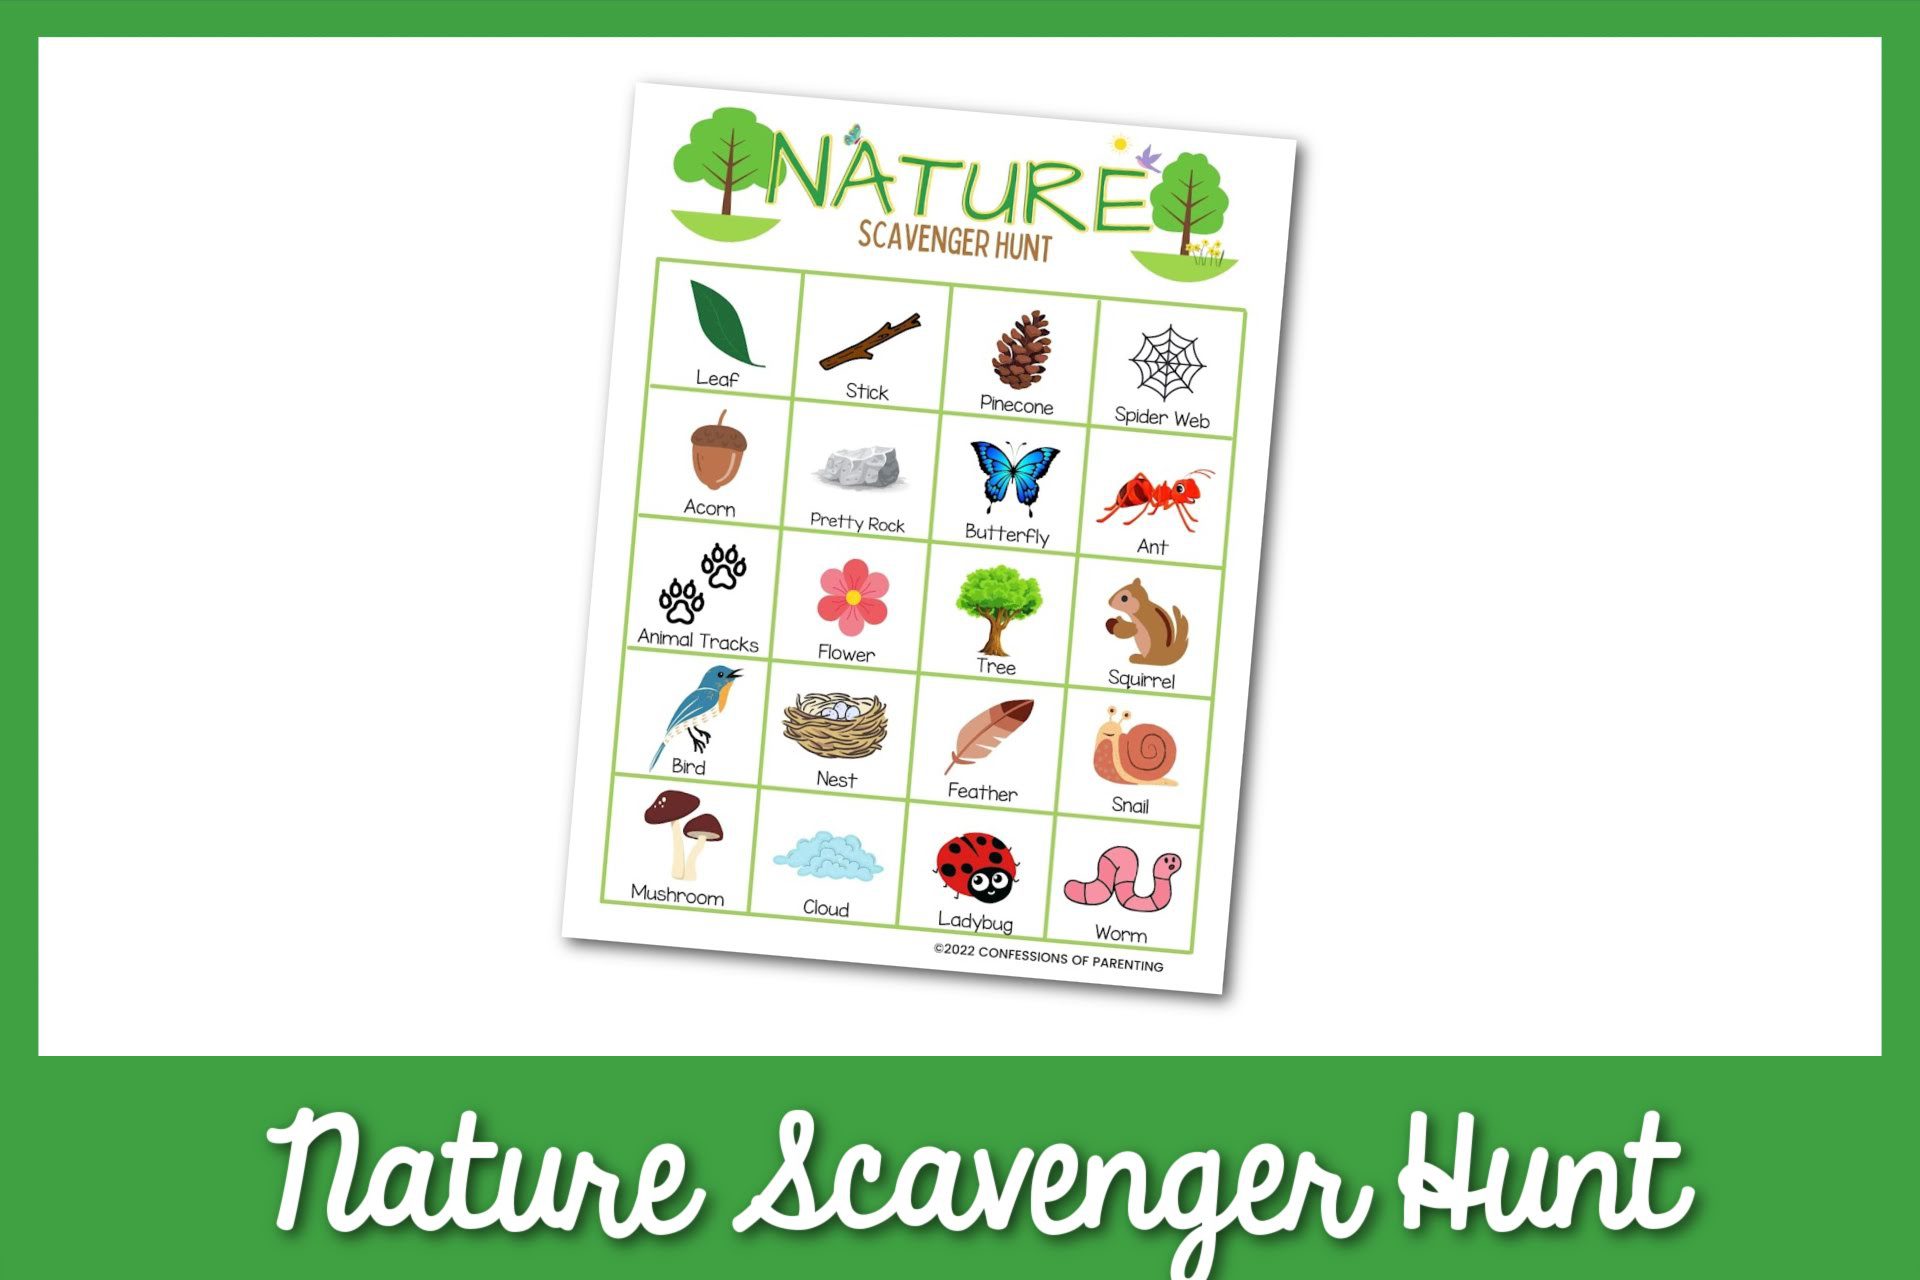 feature image: nature scavenger hunt card printable with green border